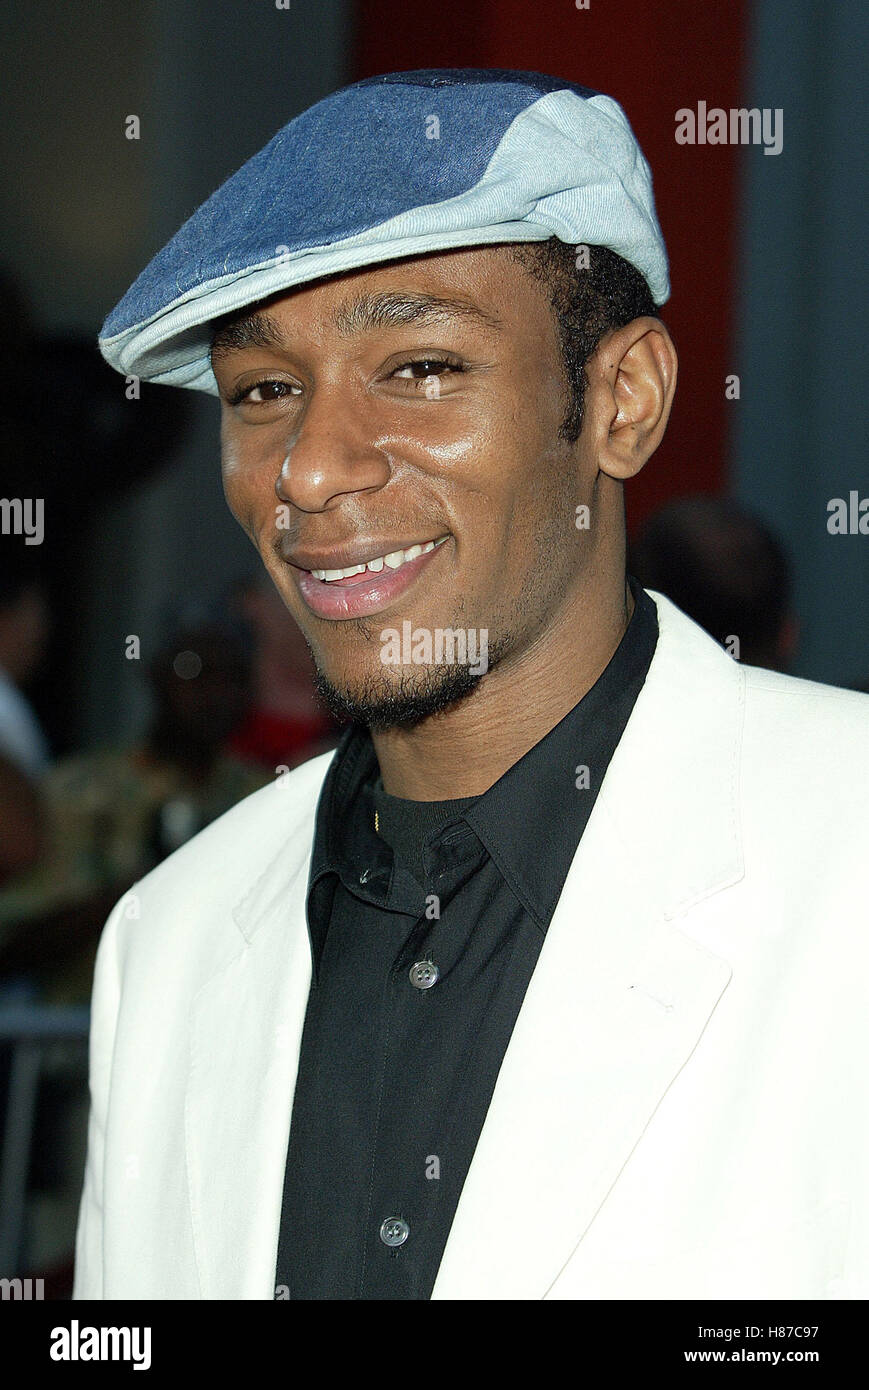 Mos Def getting into a limousine with his family after arriving at LAX  airport Los Angeles, California - 29.10.09 Stock Photo - Alamy